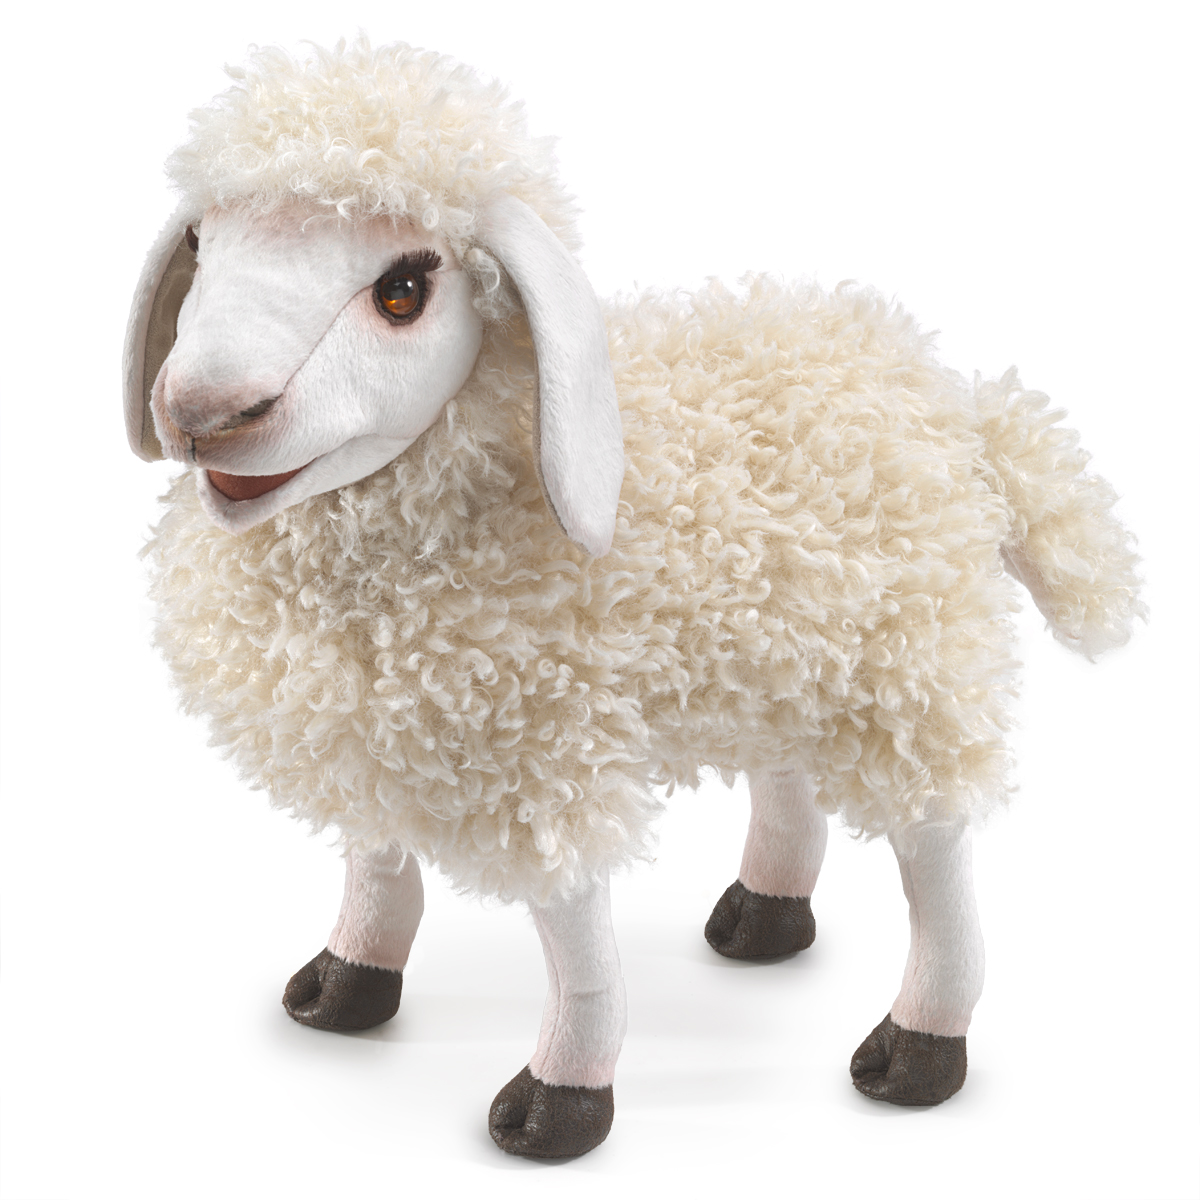 Folkmanis hand puppet wooly sheep